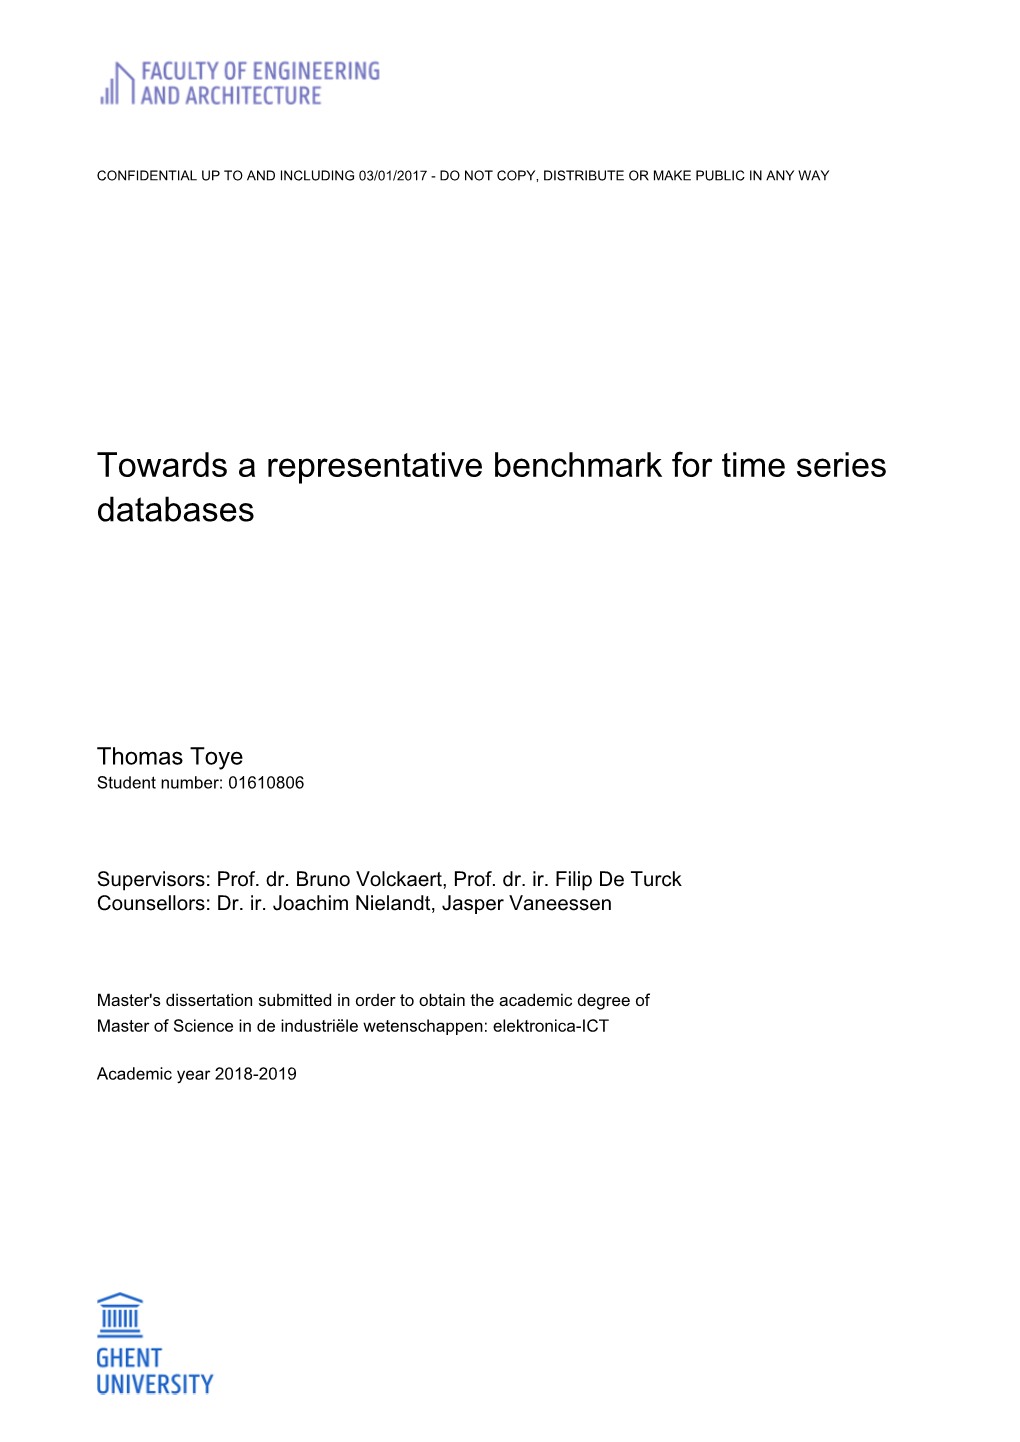 Towards a Representative Benchmark for Time Series Databases